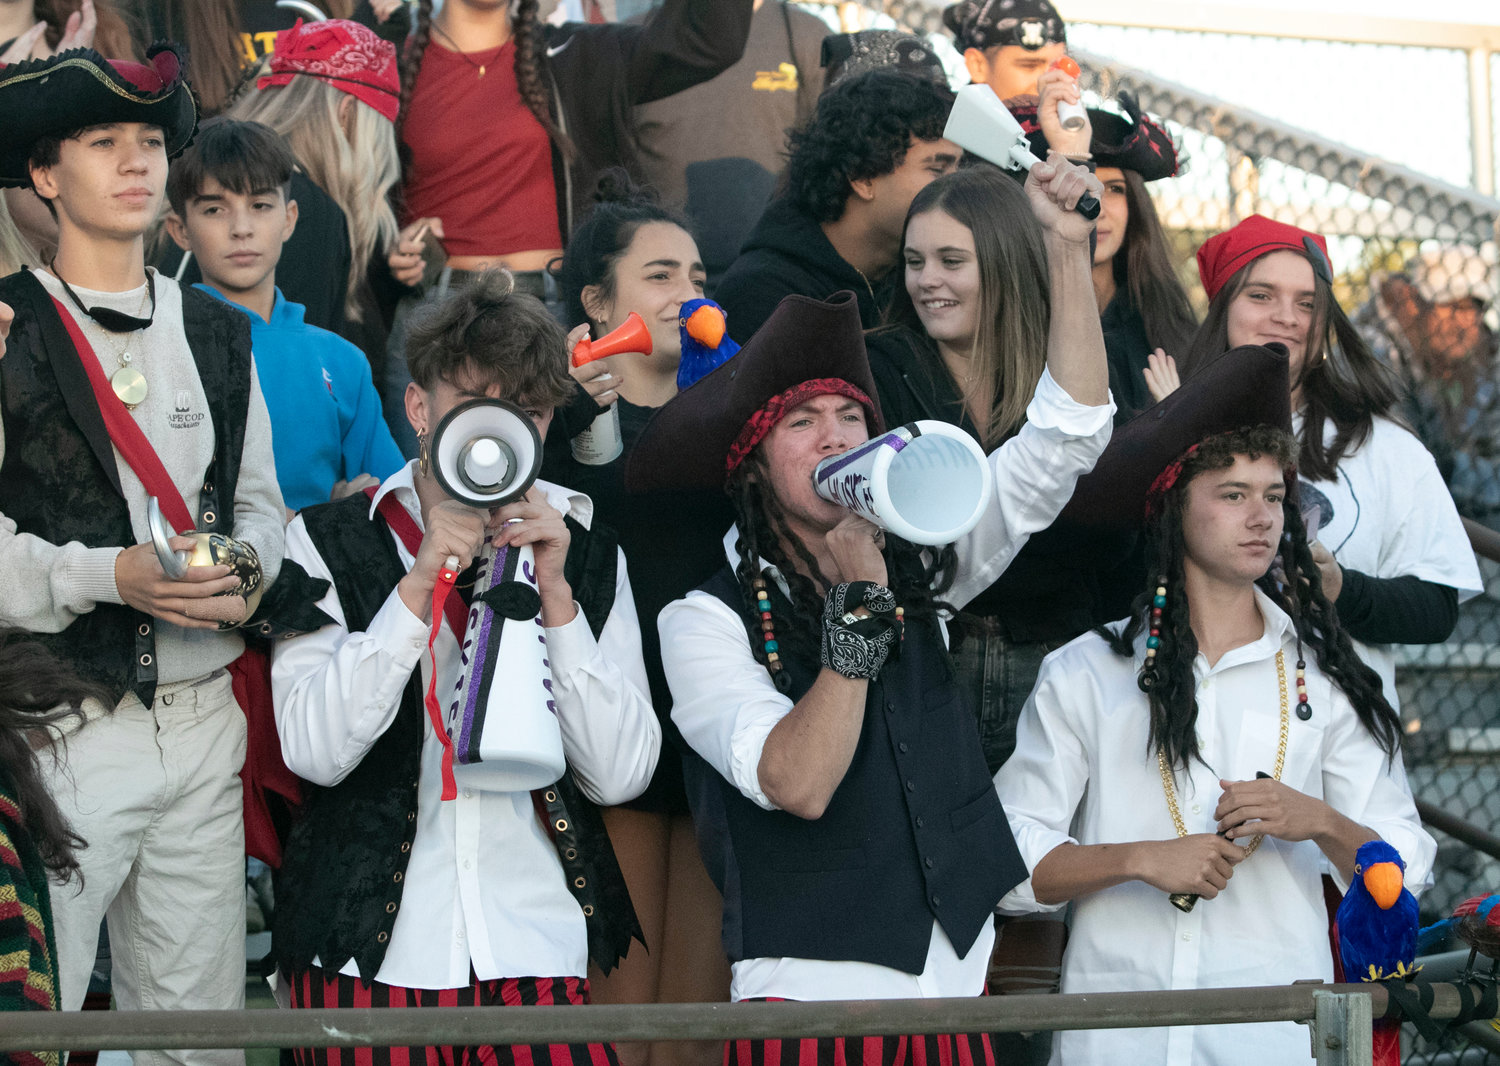 Ben Flynn (bottom left), Chris Frawley, Josh DeWolf and the Huskies ‘Dog Pound,’ cheered on the soccer team donned in pirate gear, prior to the football game that started at 7 p.m.